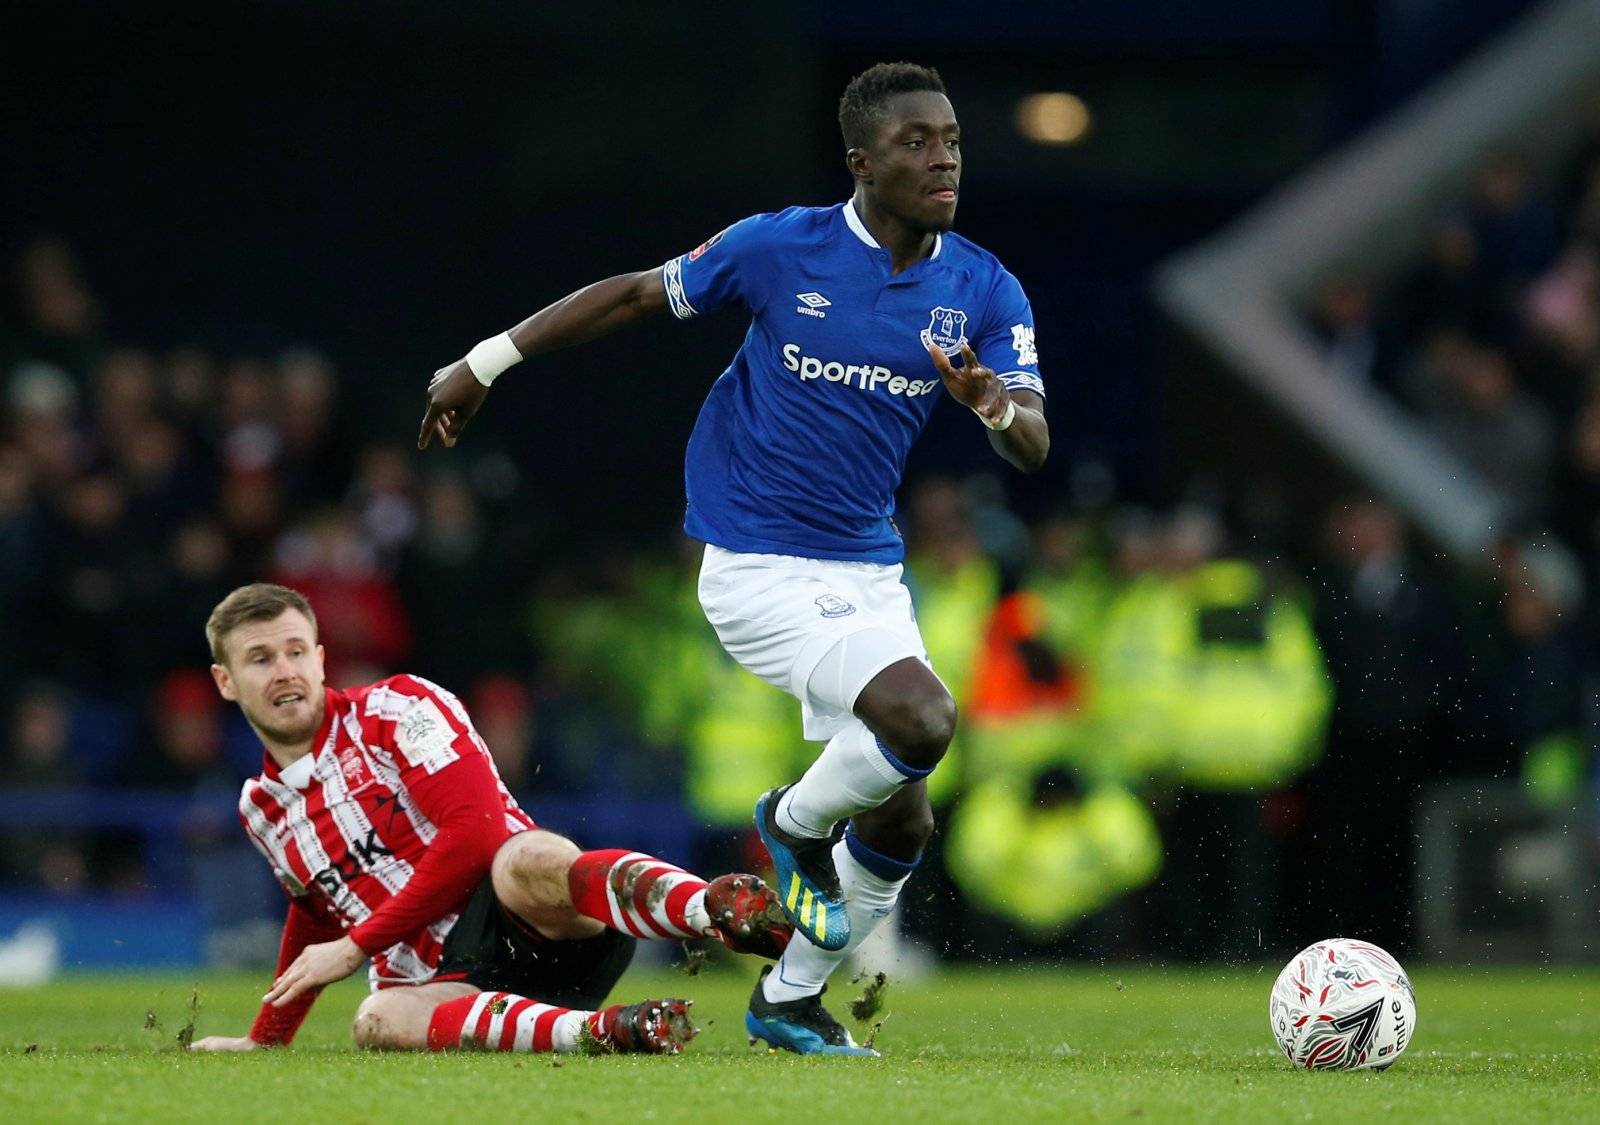 Everton: Fans speculate as Idrissa Gueye comments on Thiago Silva situation - Everton